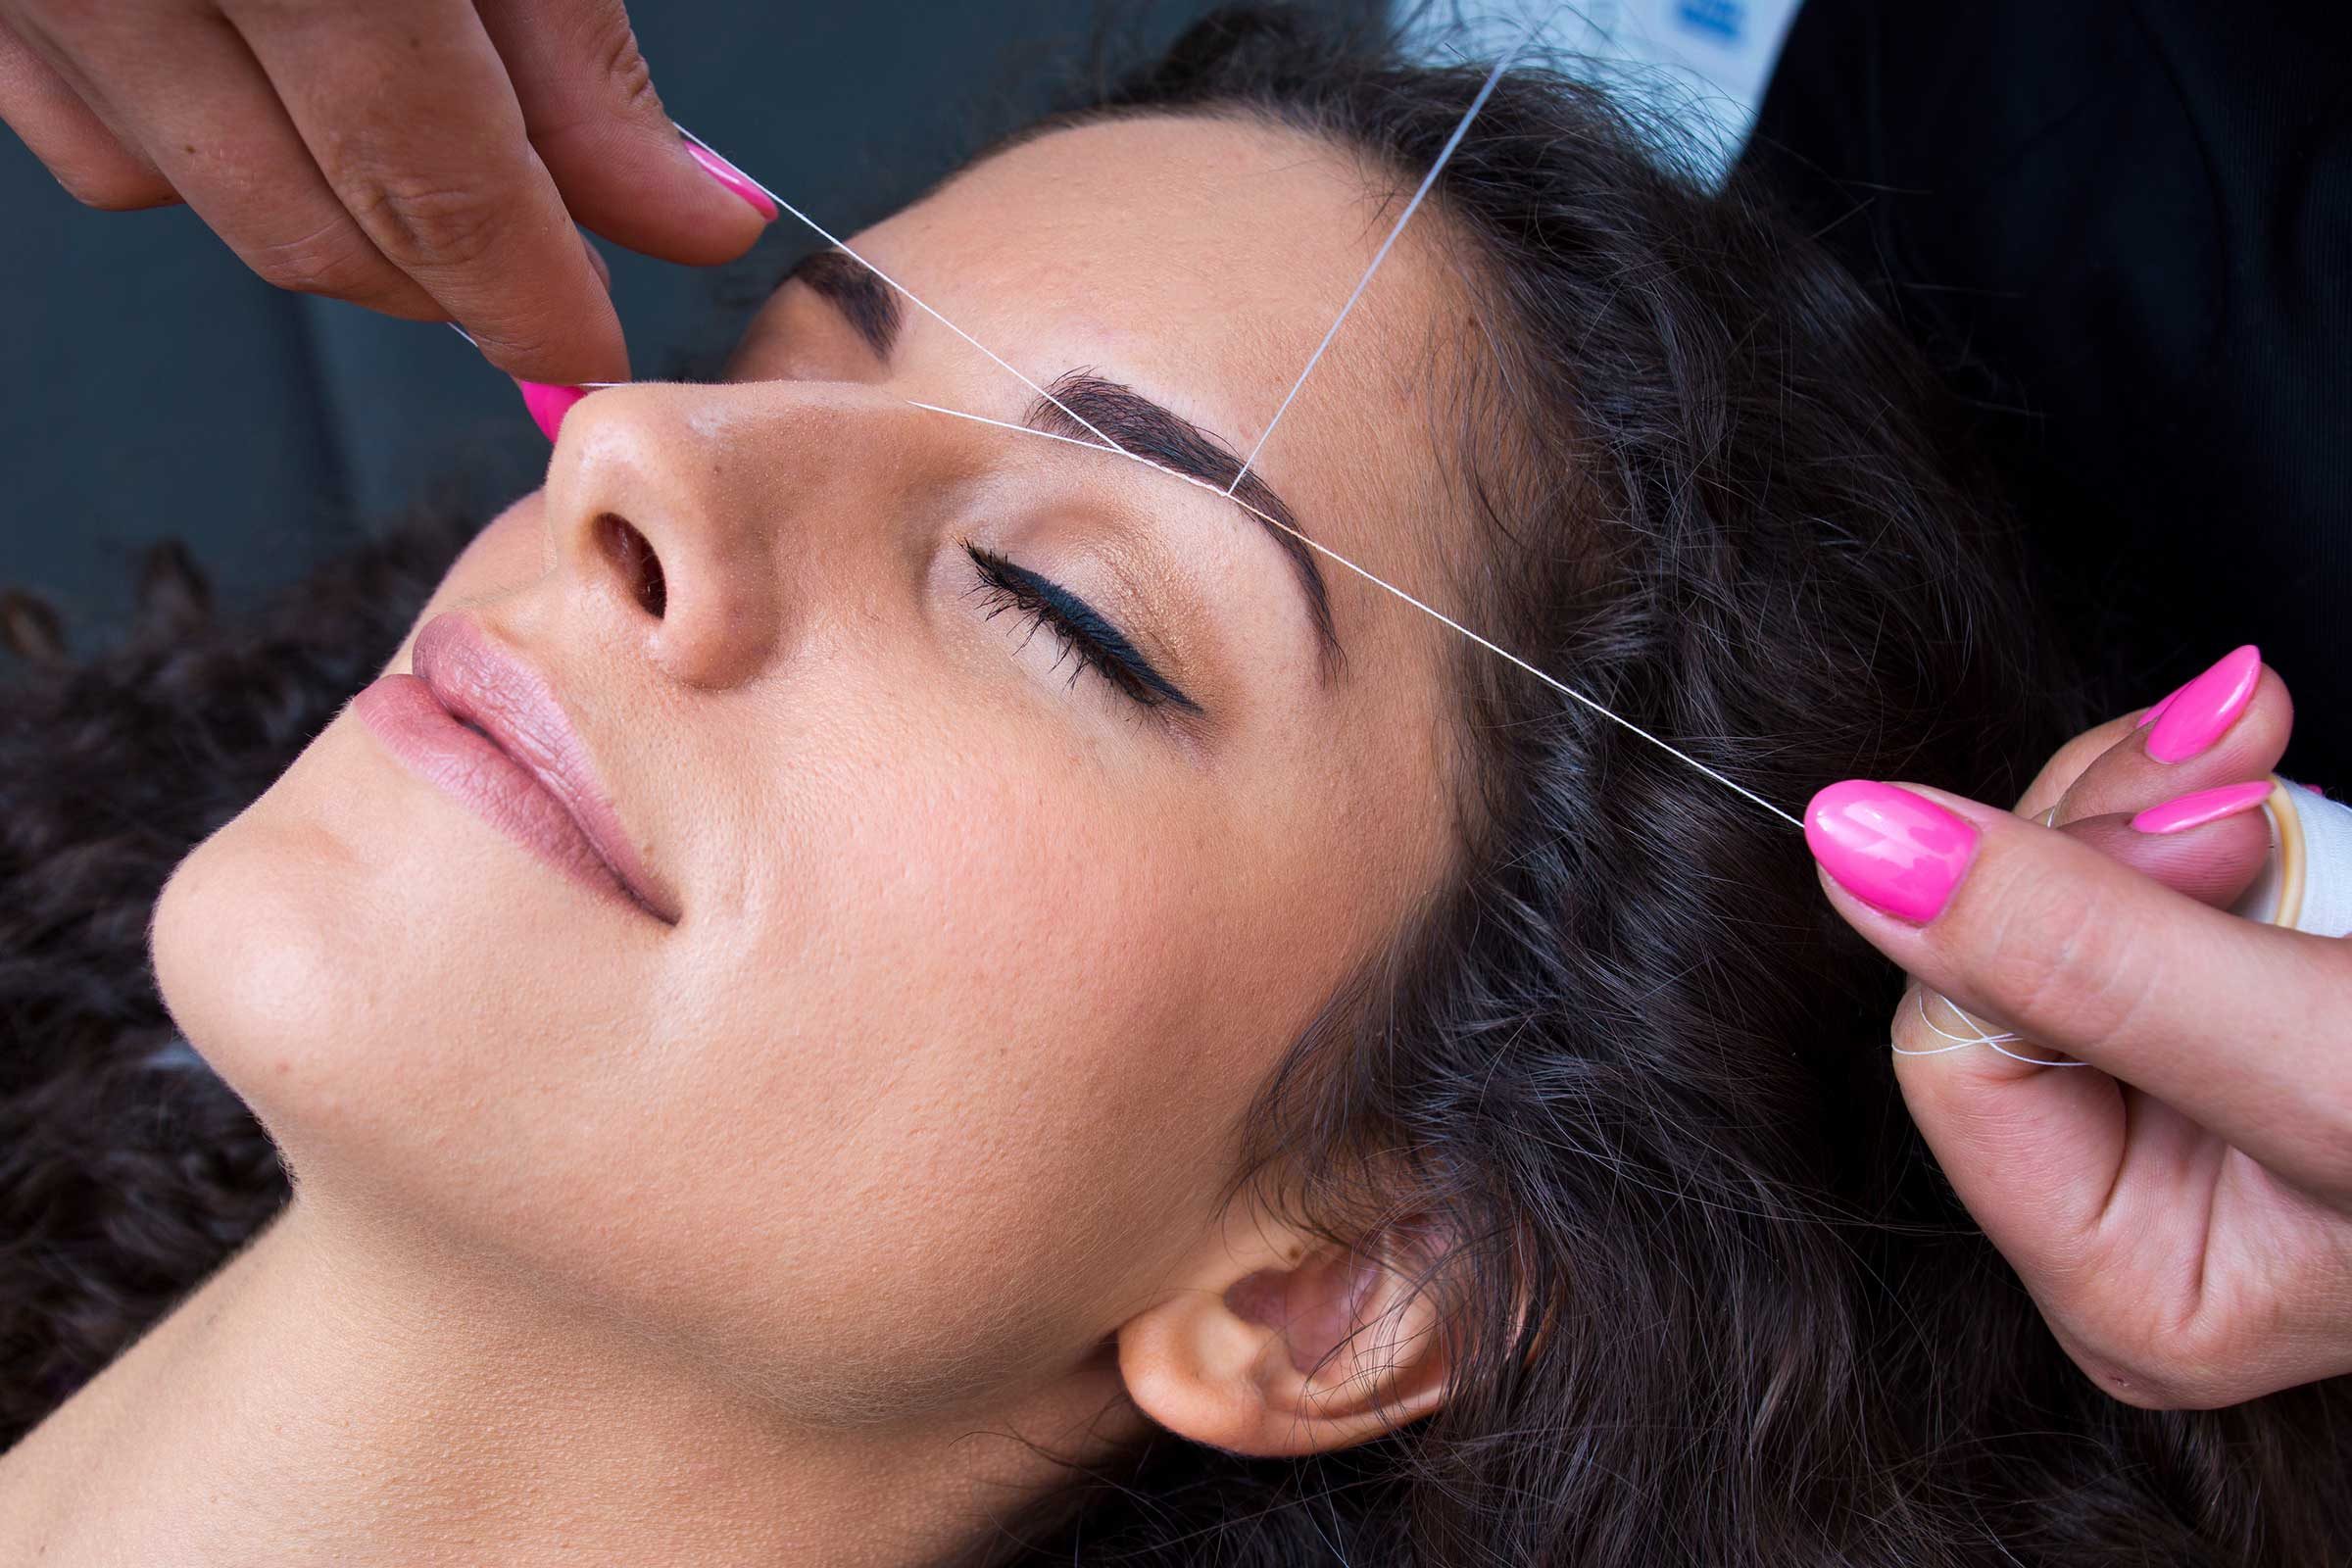 Should You Get Your Eyebrows Threaded? Here's How It Works